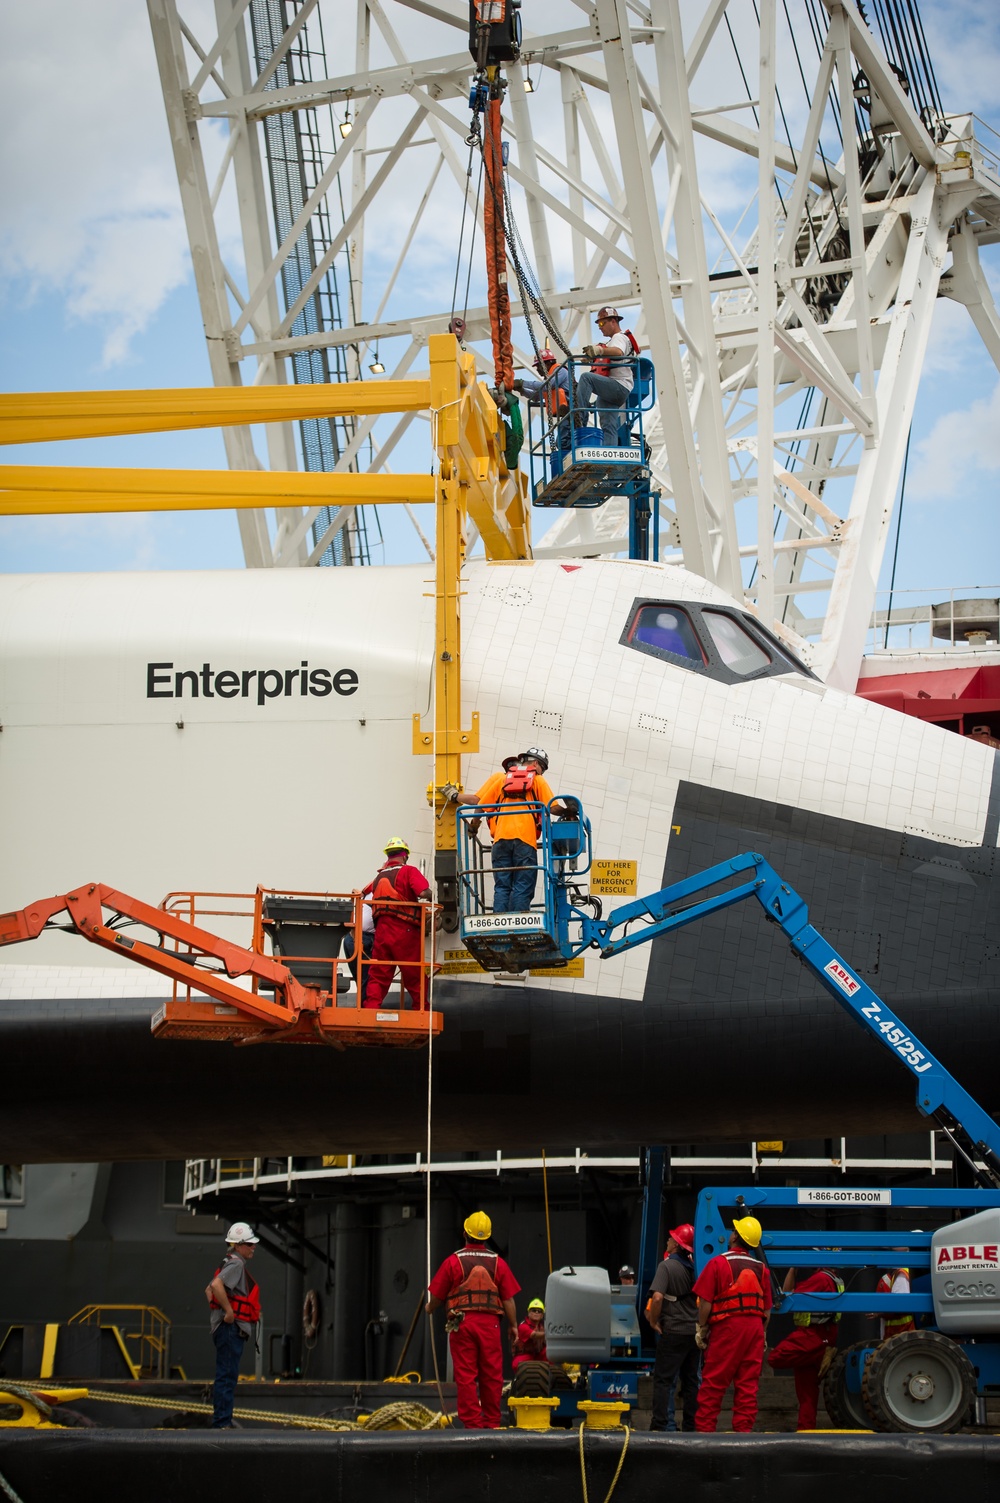 Space Shuttle Enterprise Move to Intrepid (201206060018HQ)